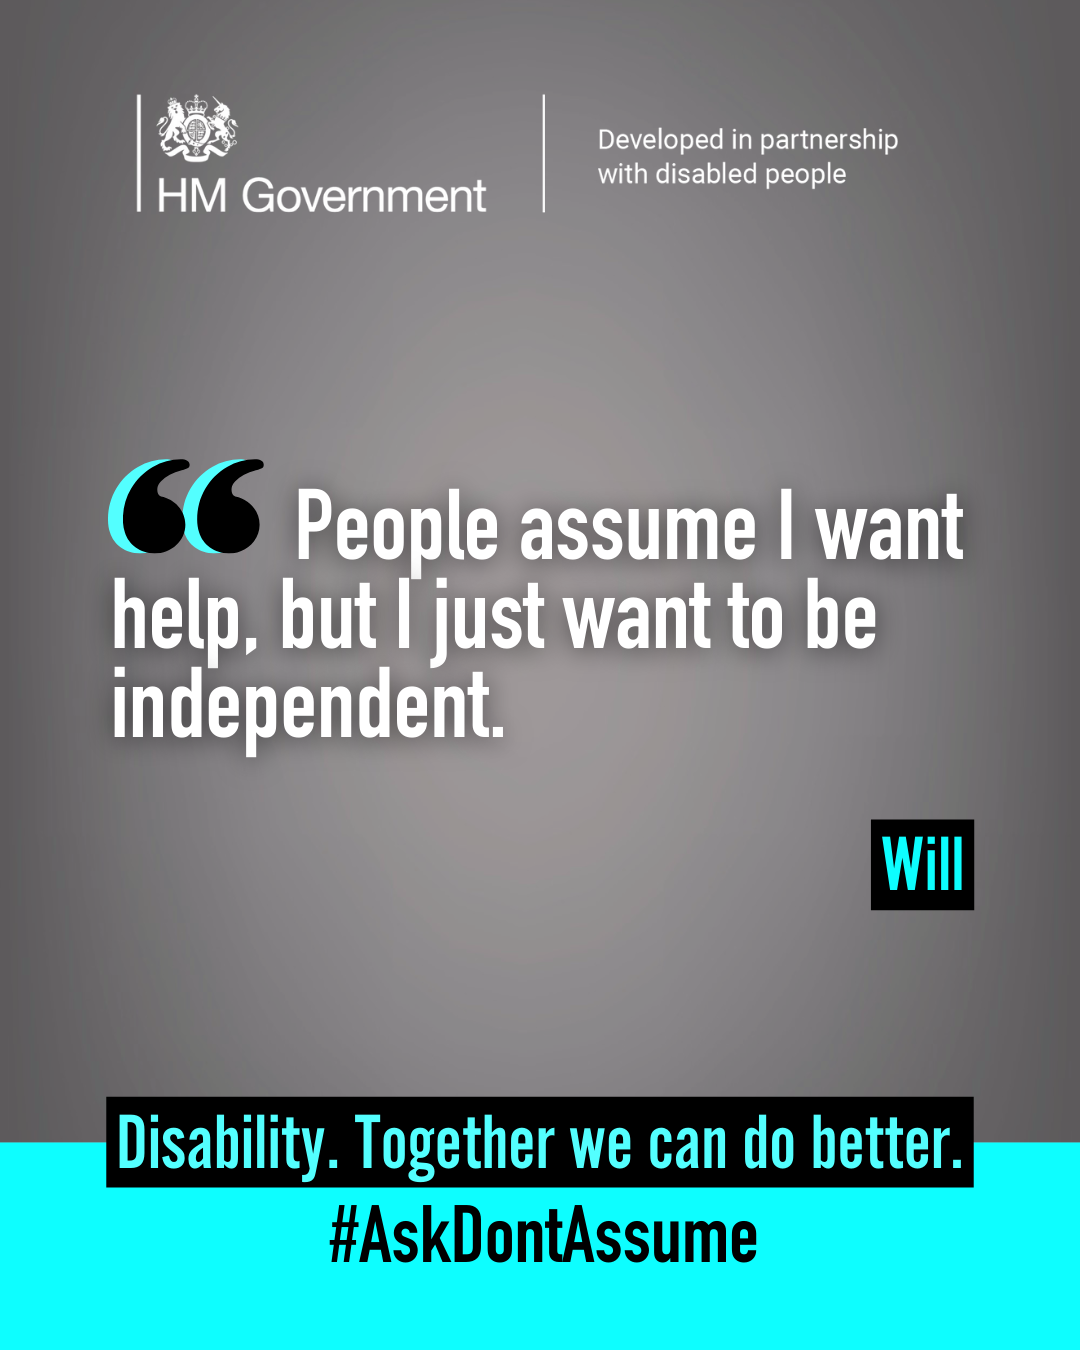 Dark grey portrait graphic with the HM Government logo and “Developed in partnership with disabled people” at the top. A quote from Will reads: “People assume I want help, but I just want to be independent”. At the bottom of the graphic it reads: “Disability. Together we can do better. #AskDontAssume”